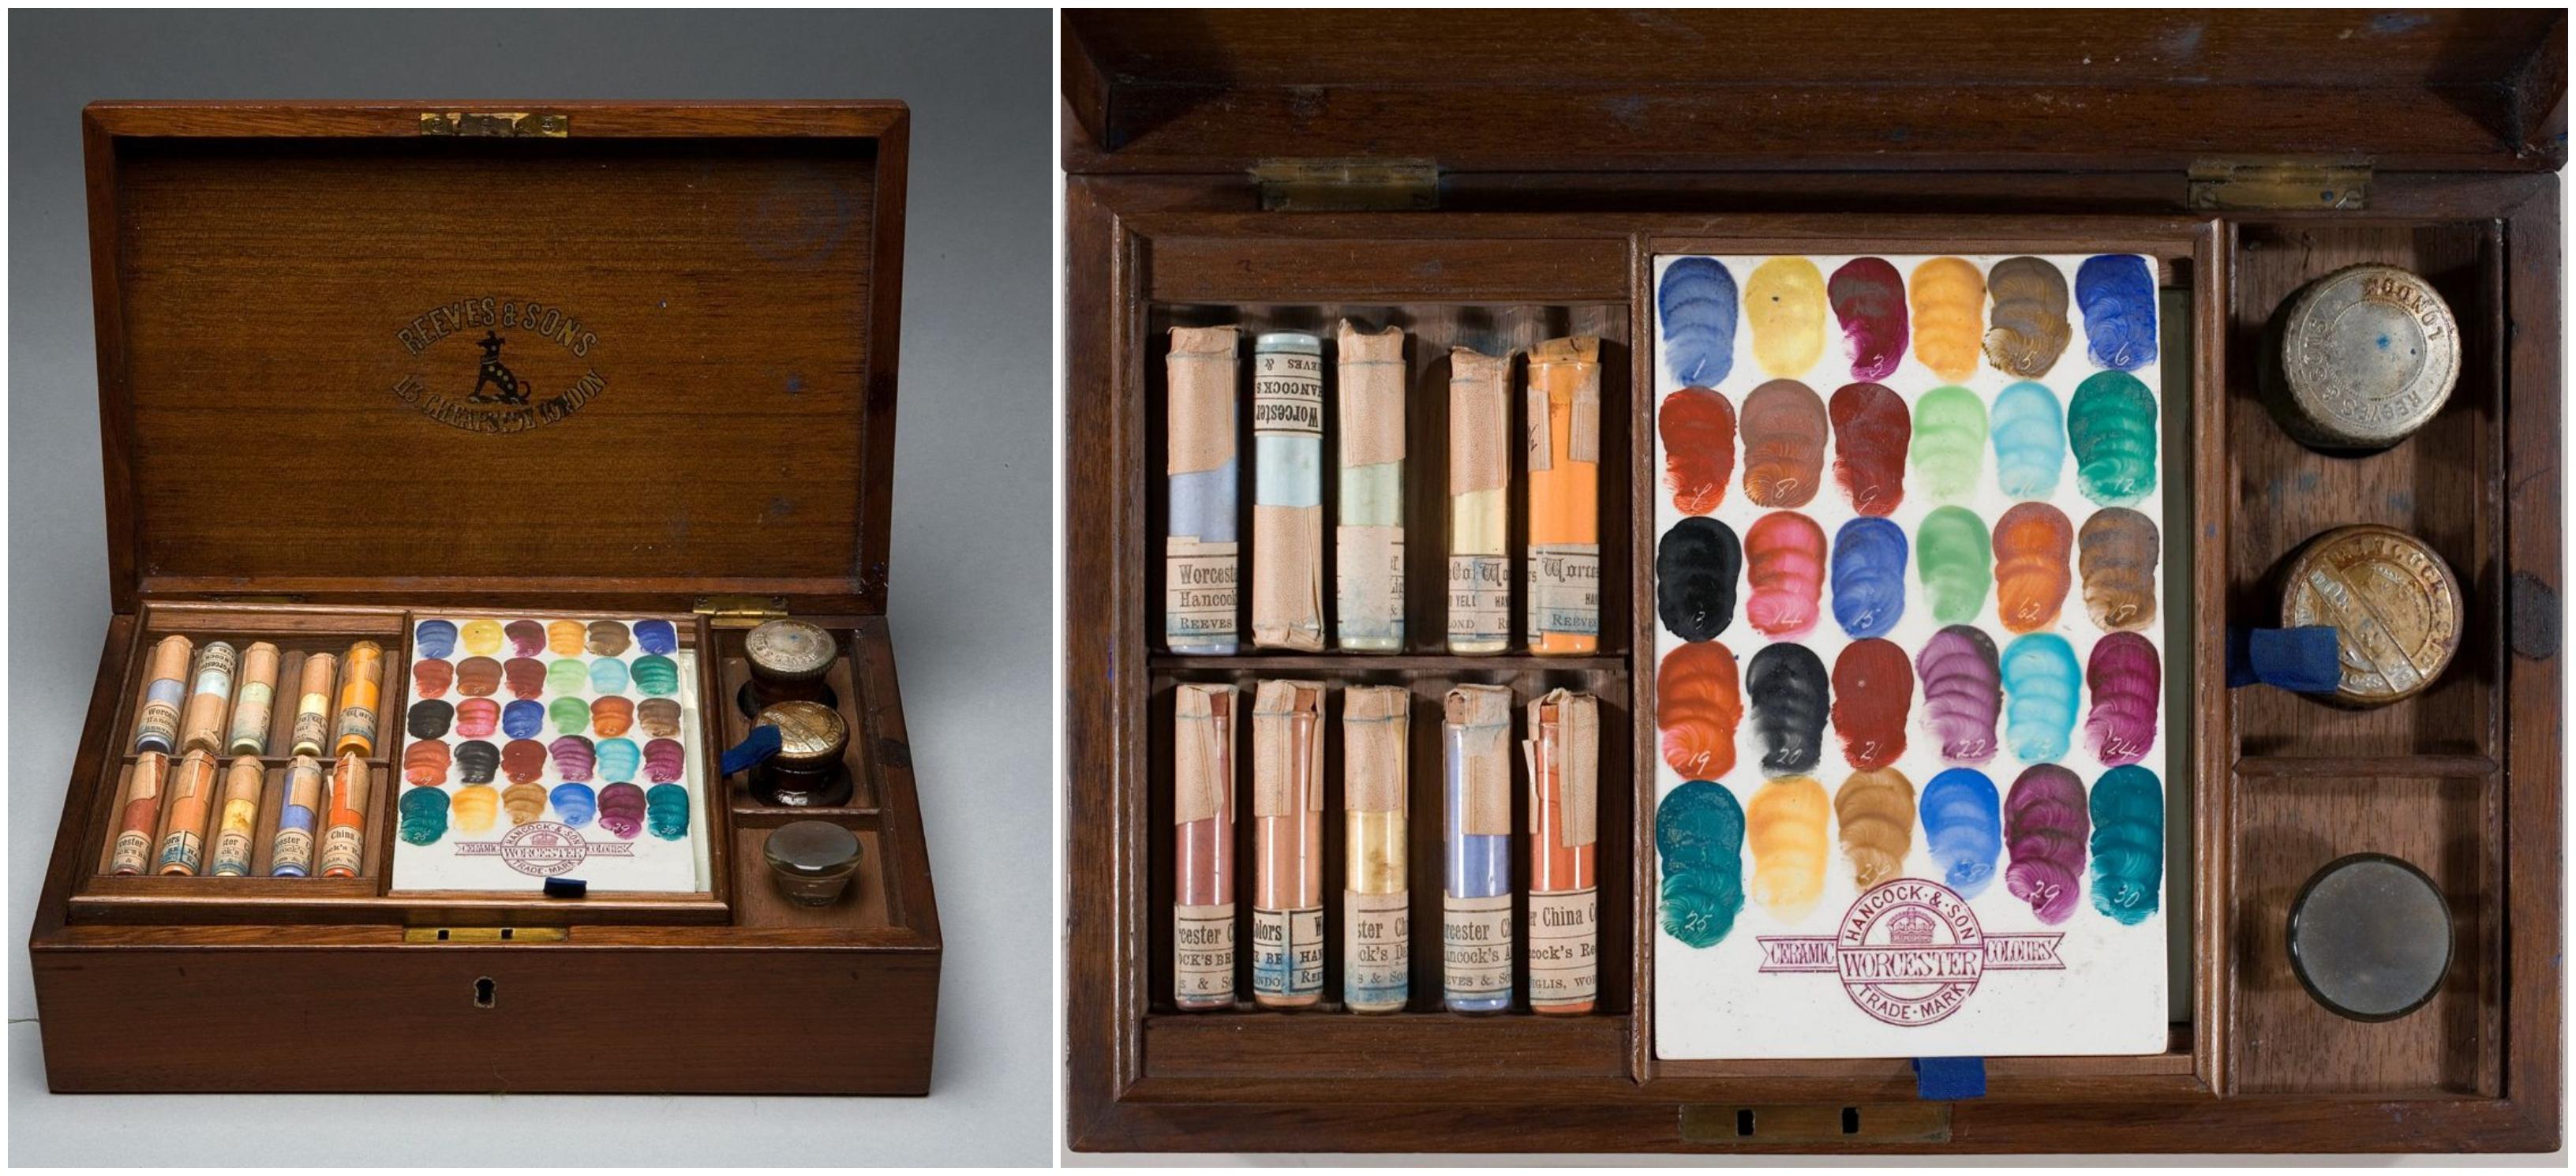 Box of pigments and implements for painting on china, Reeves & Sons (London, England), c. 1880. Yale Center for British Art.jpeg